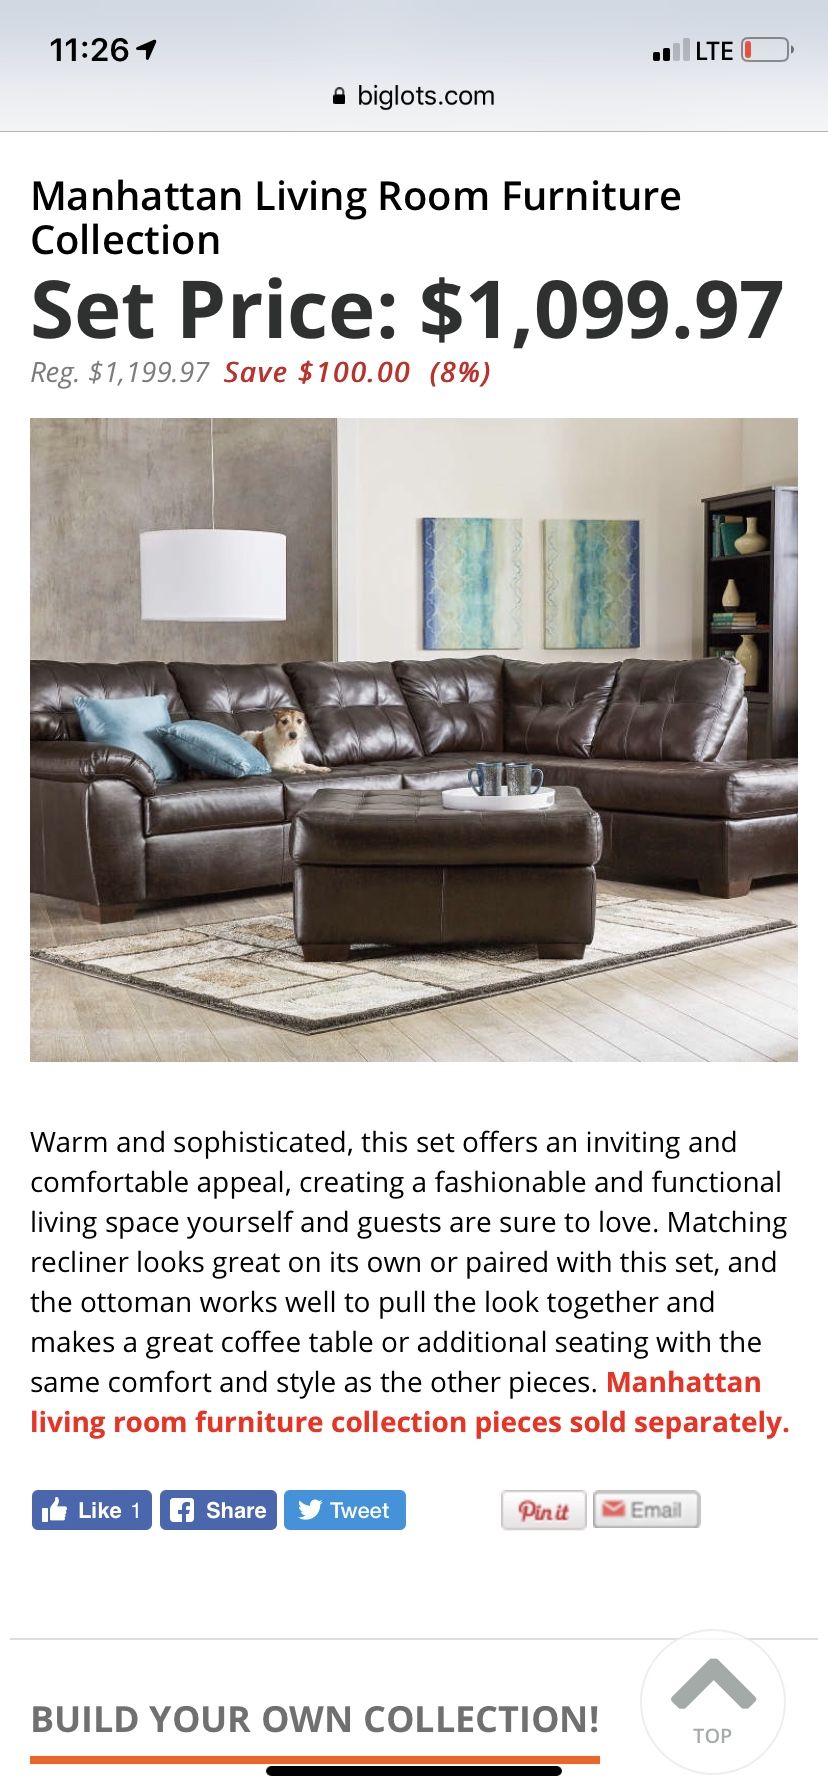 Manhattan Living Room Furniture Collection